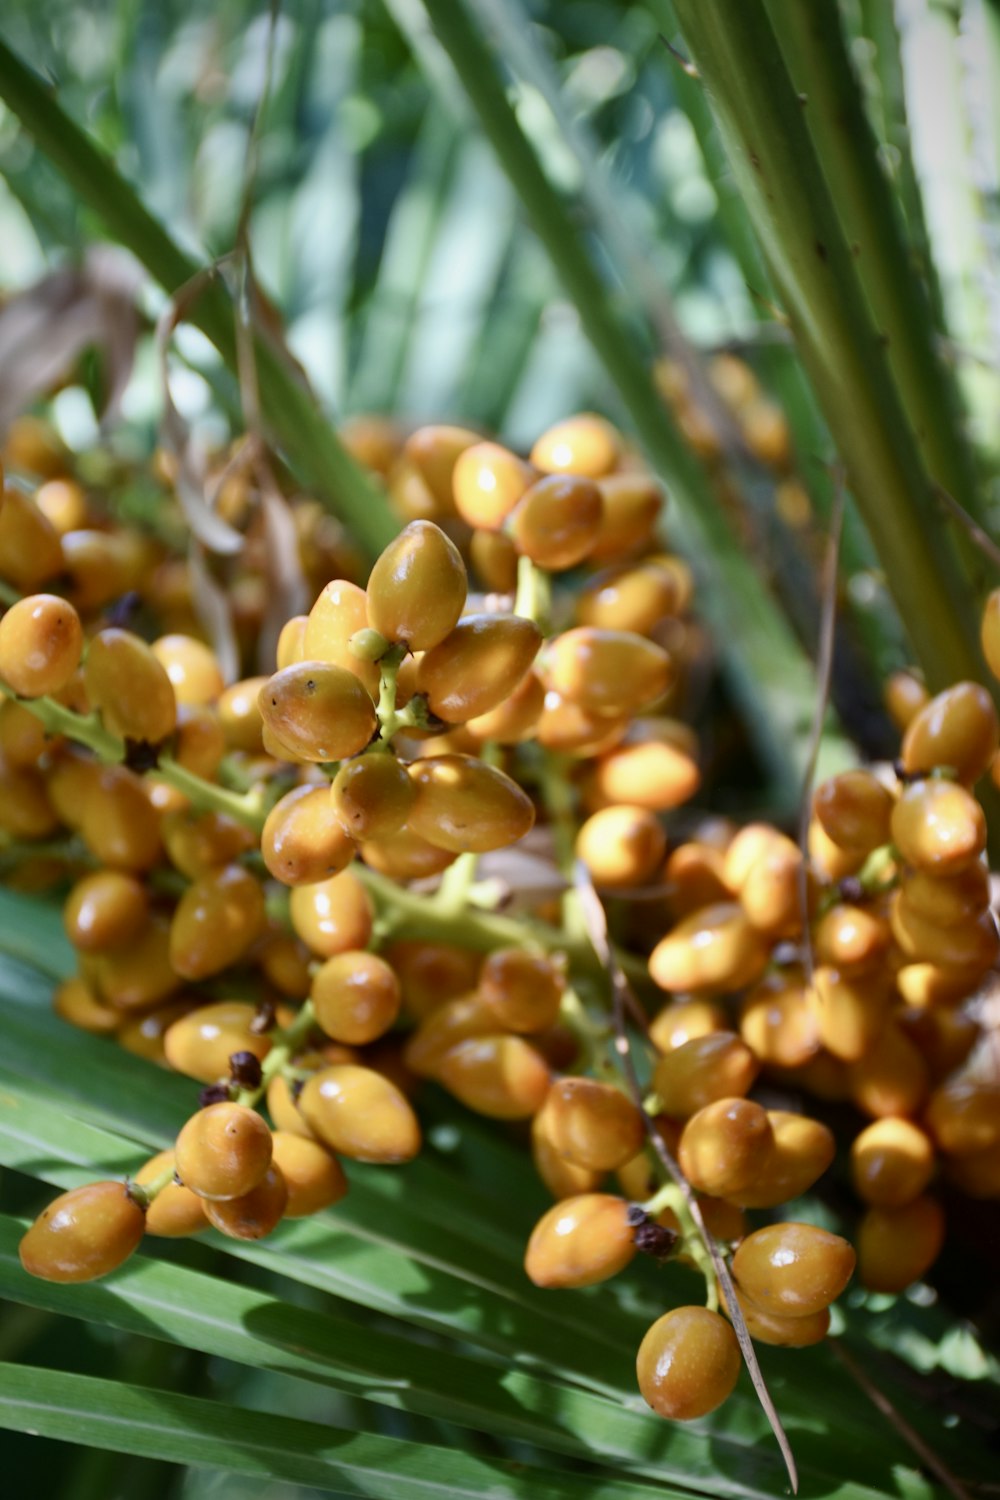 a close up of a plant with many small round fruits